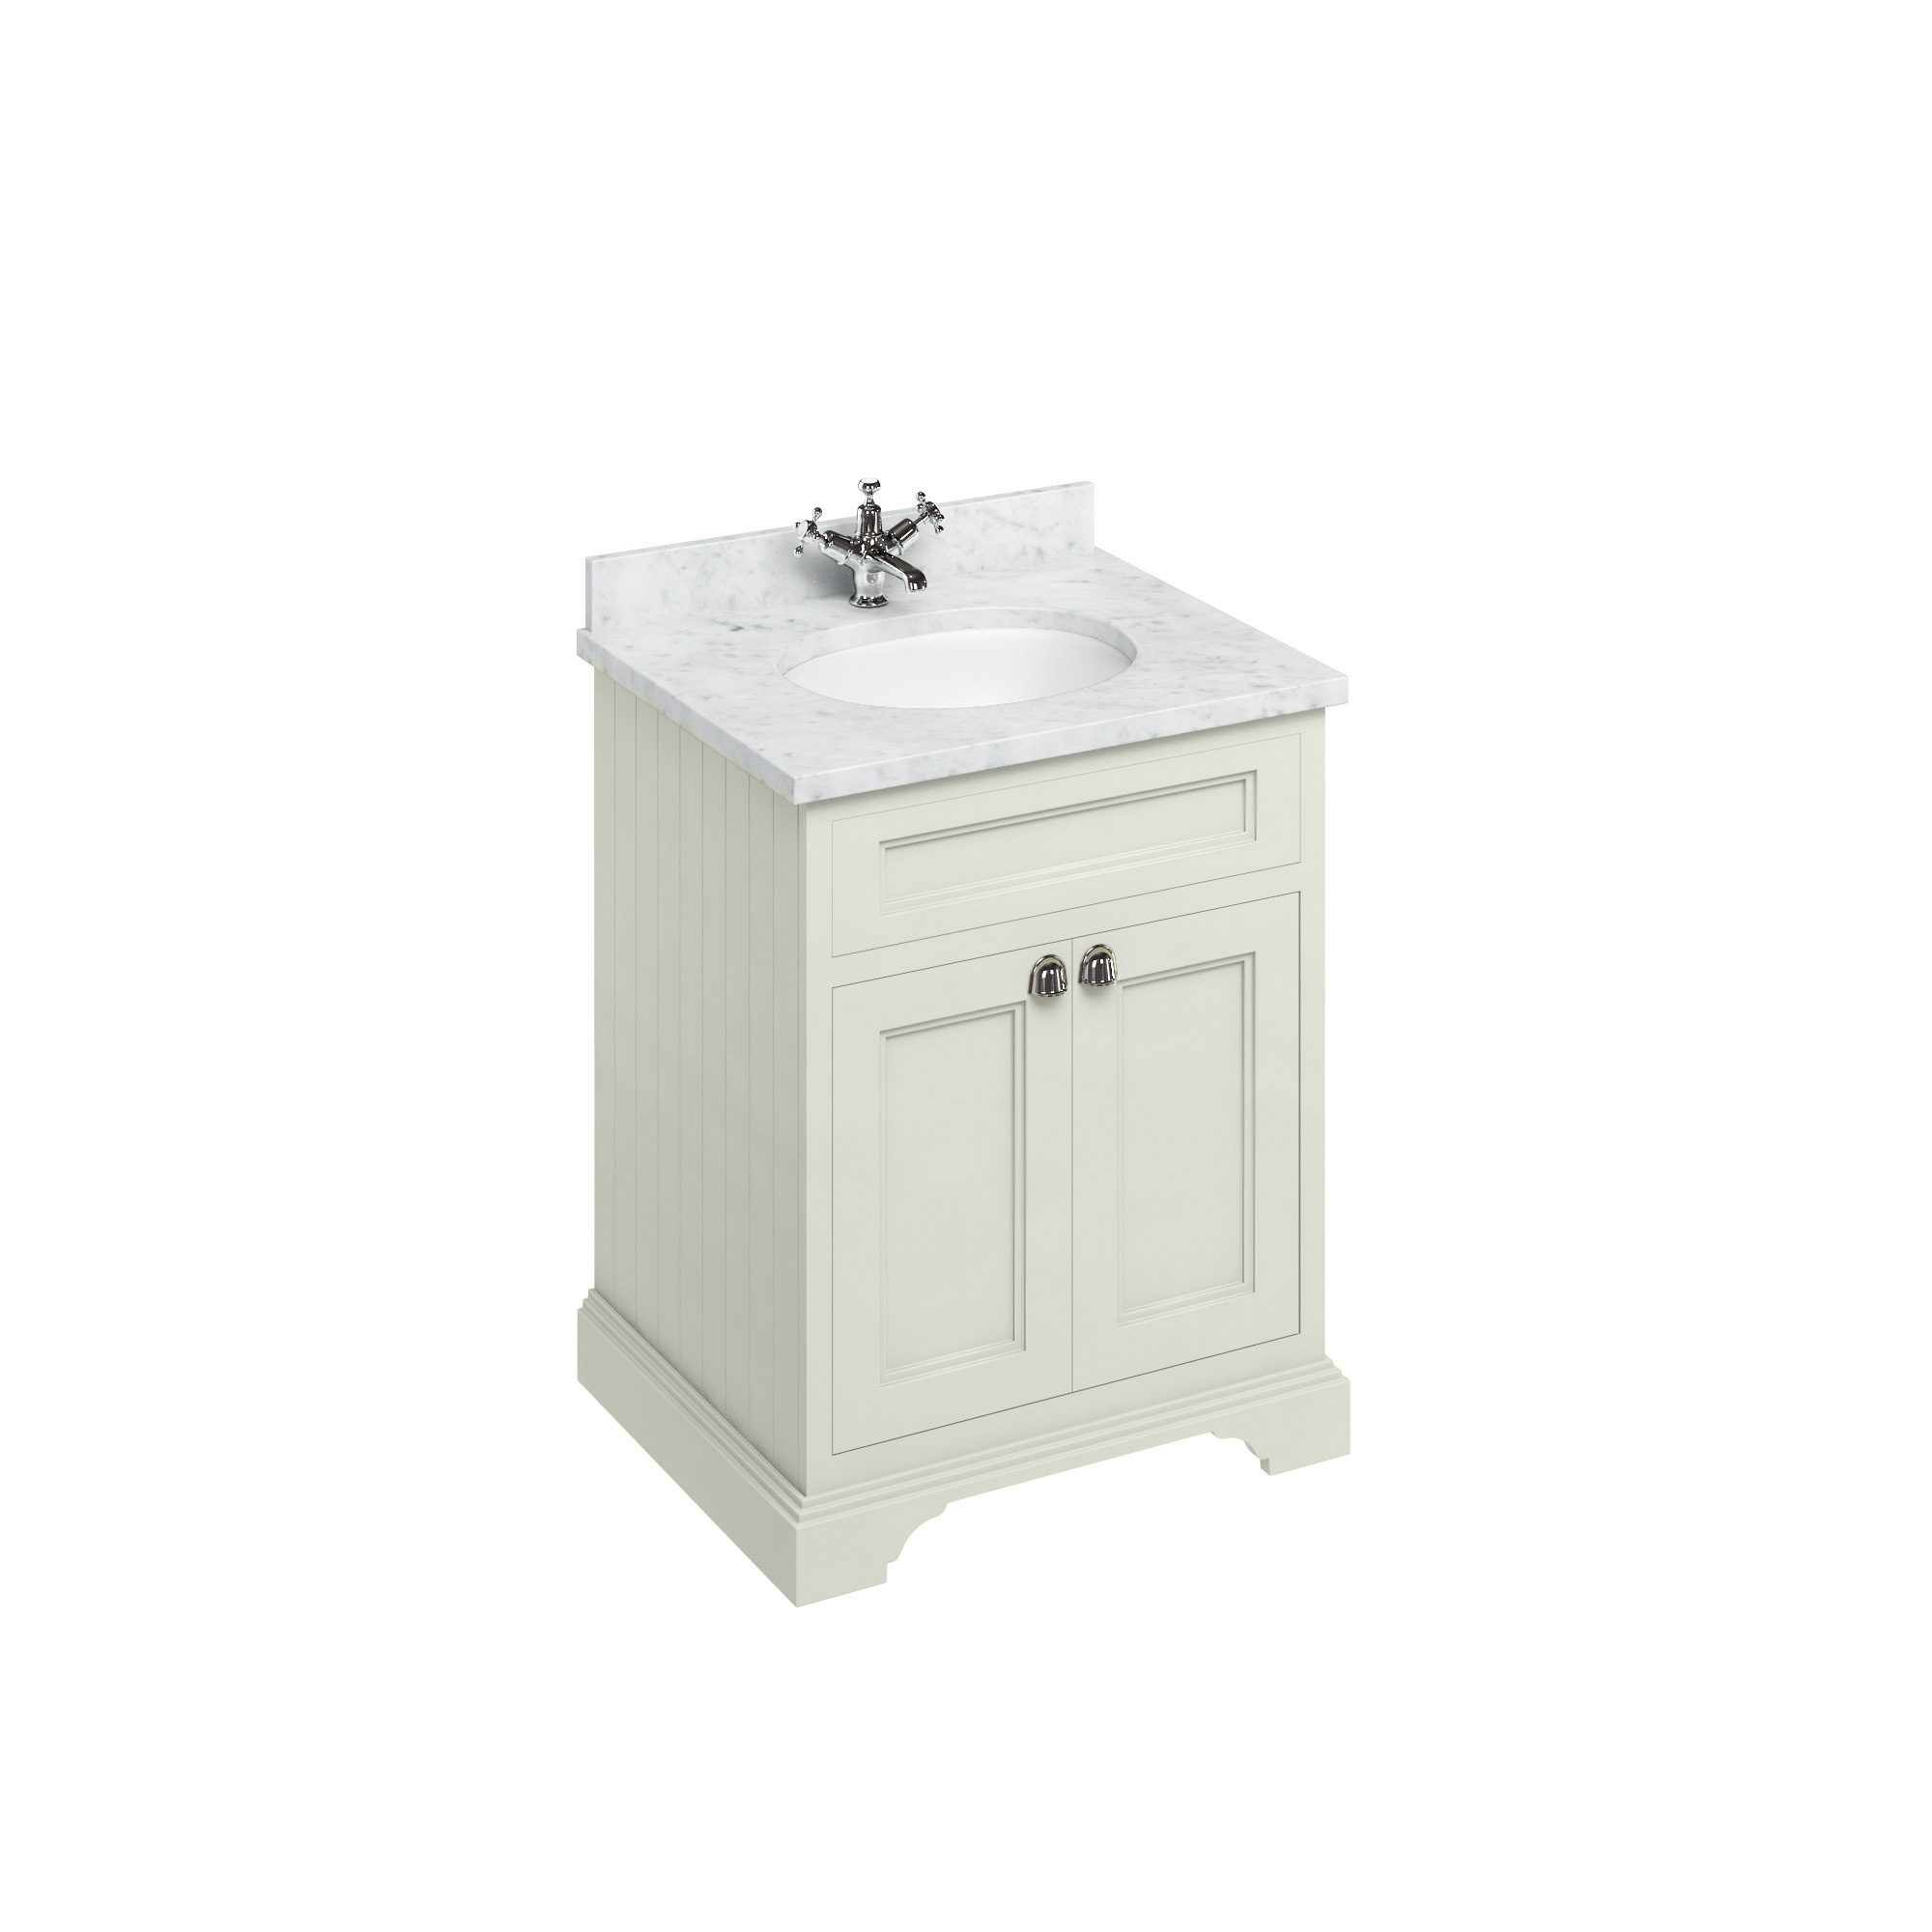 Freestanding 65 Vanity Unit with doors - Sand and Minerva Carrara white worktop with integrated white basin